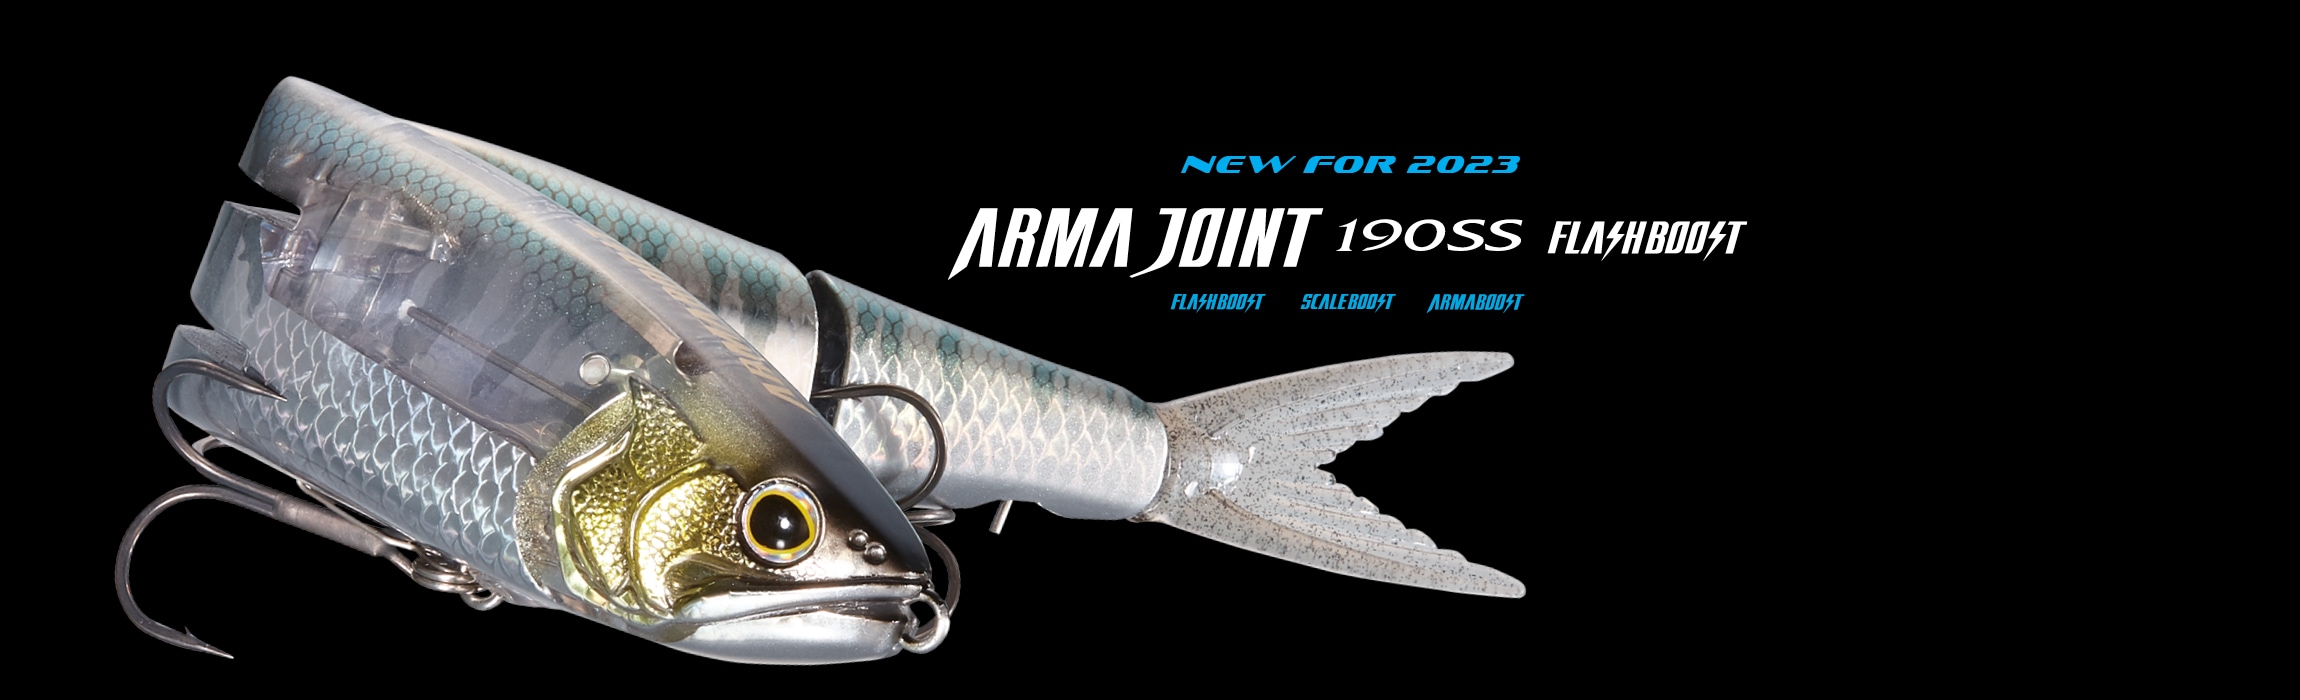 ARMAJOINT 190SS FLASH BOOST